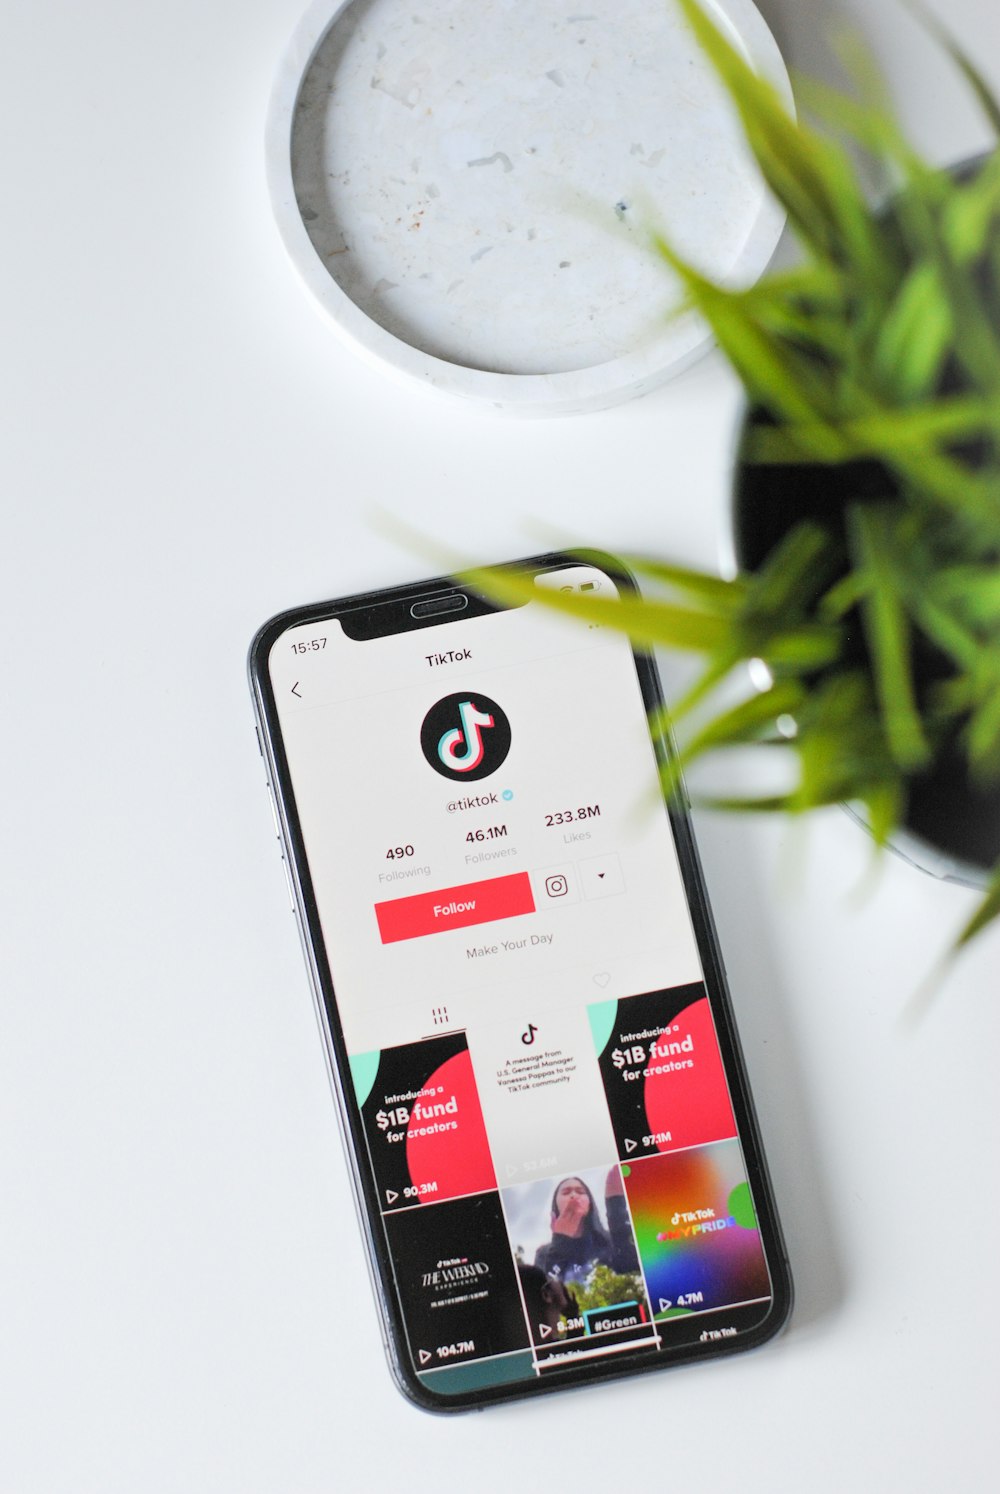 Mobile App Design and Development Service: What Can We Learn from TikTok About Mobile Application Development?